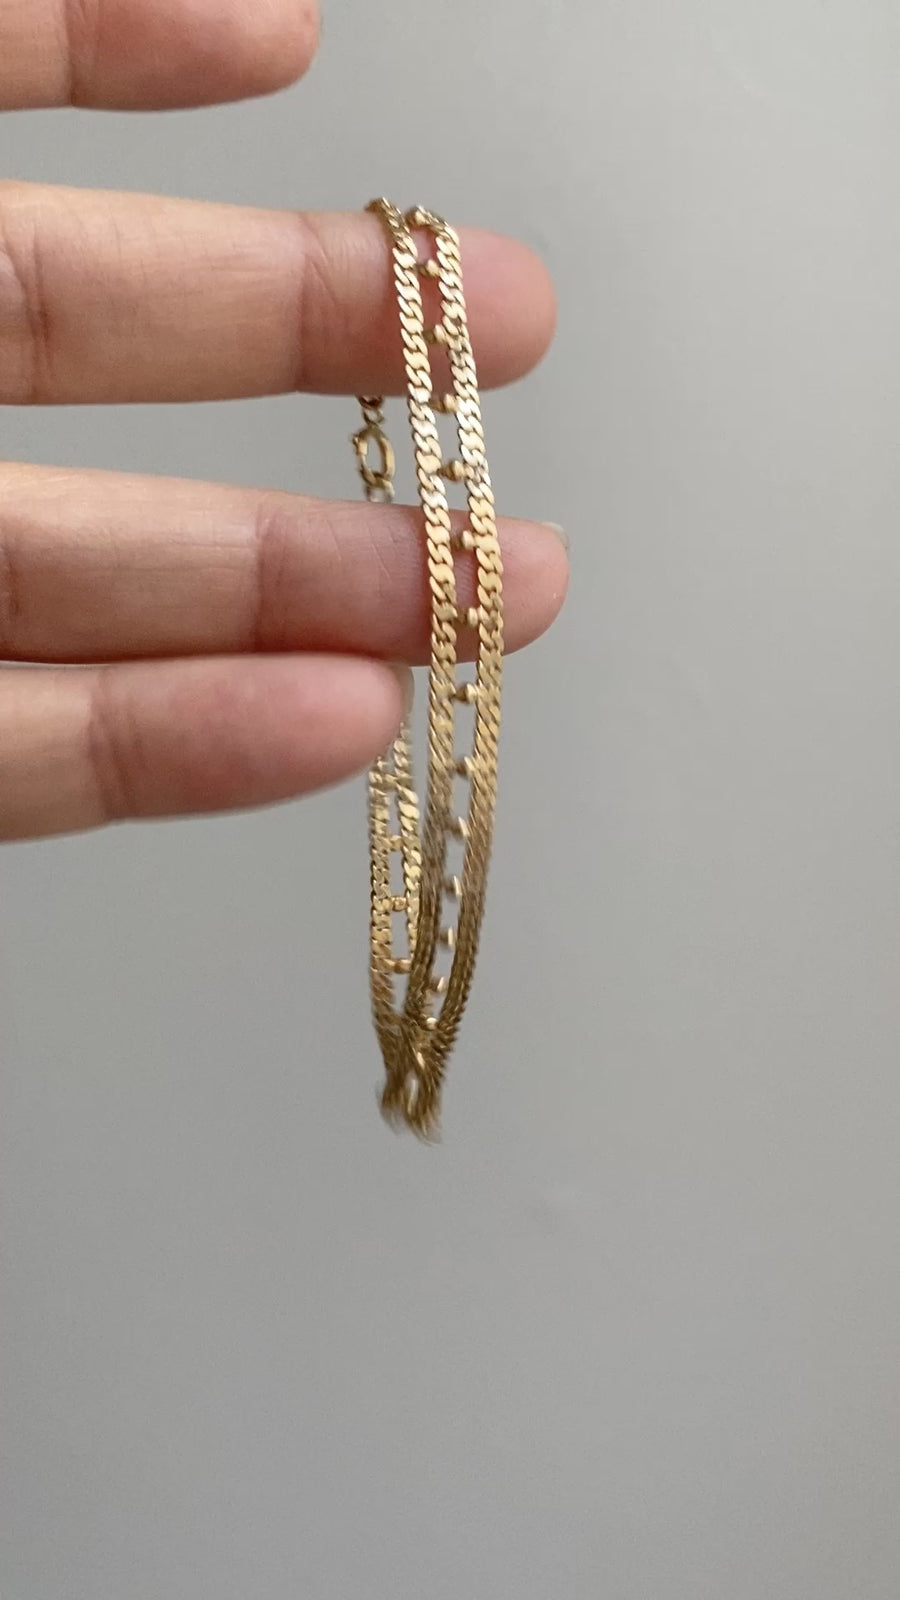 18k Gold double row pressed curb link bracelet -  7.75 inch length